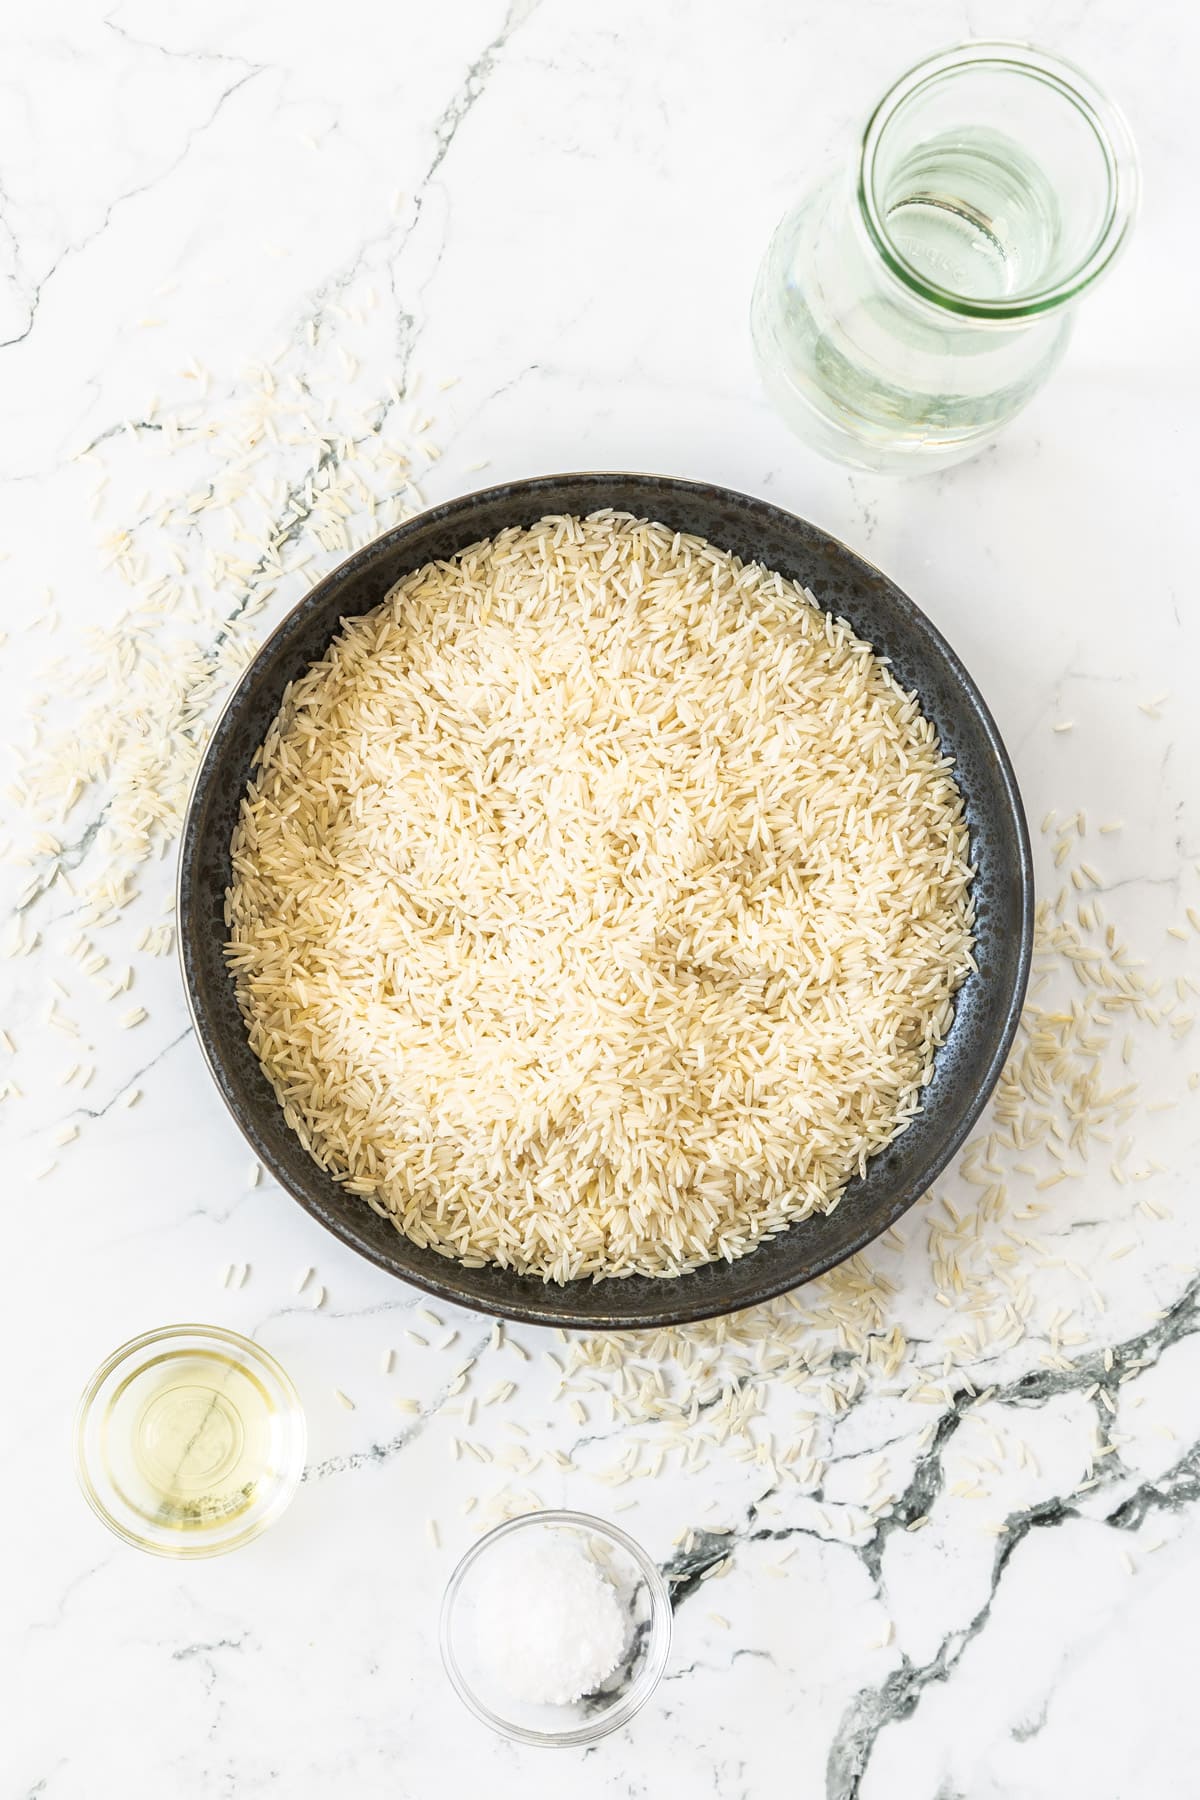 basmati rice in a dark bowl with water, salt, and oil in small bowls.